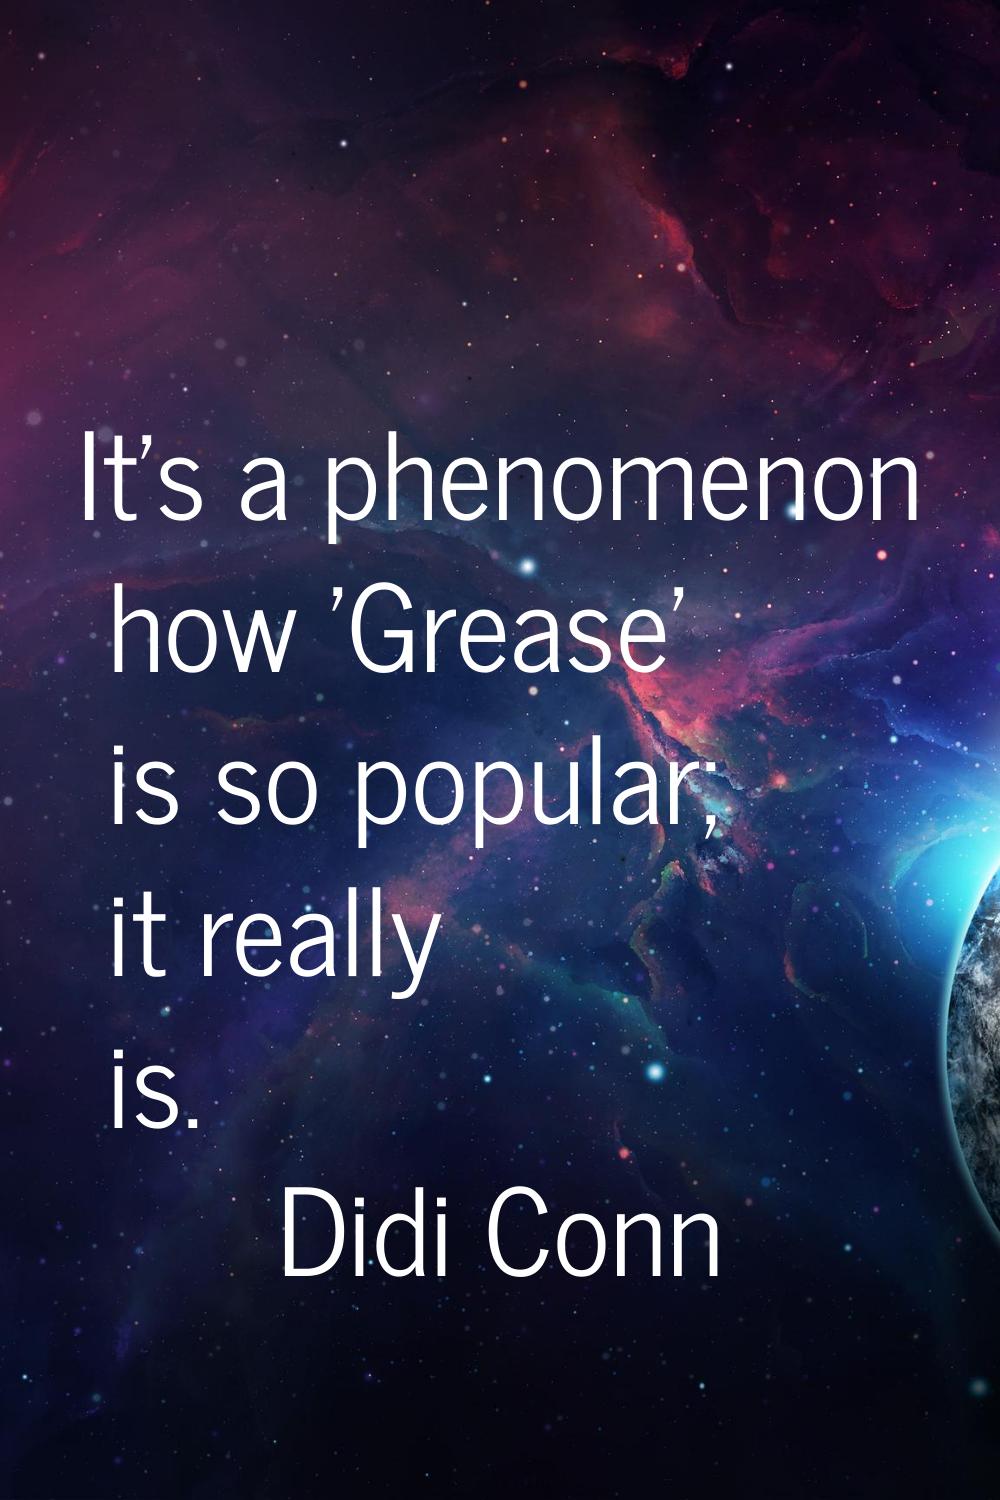 It's a phenomenon how 'Grease' is so popular; it really is.